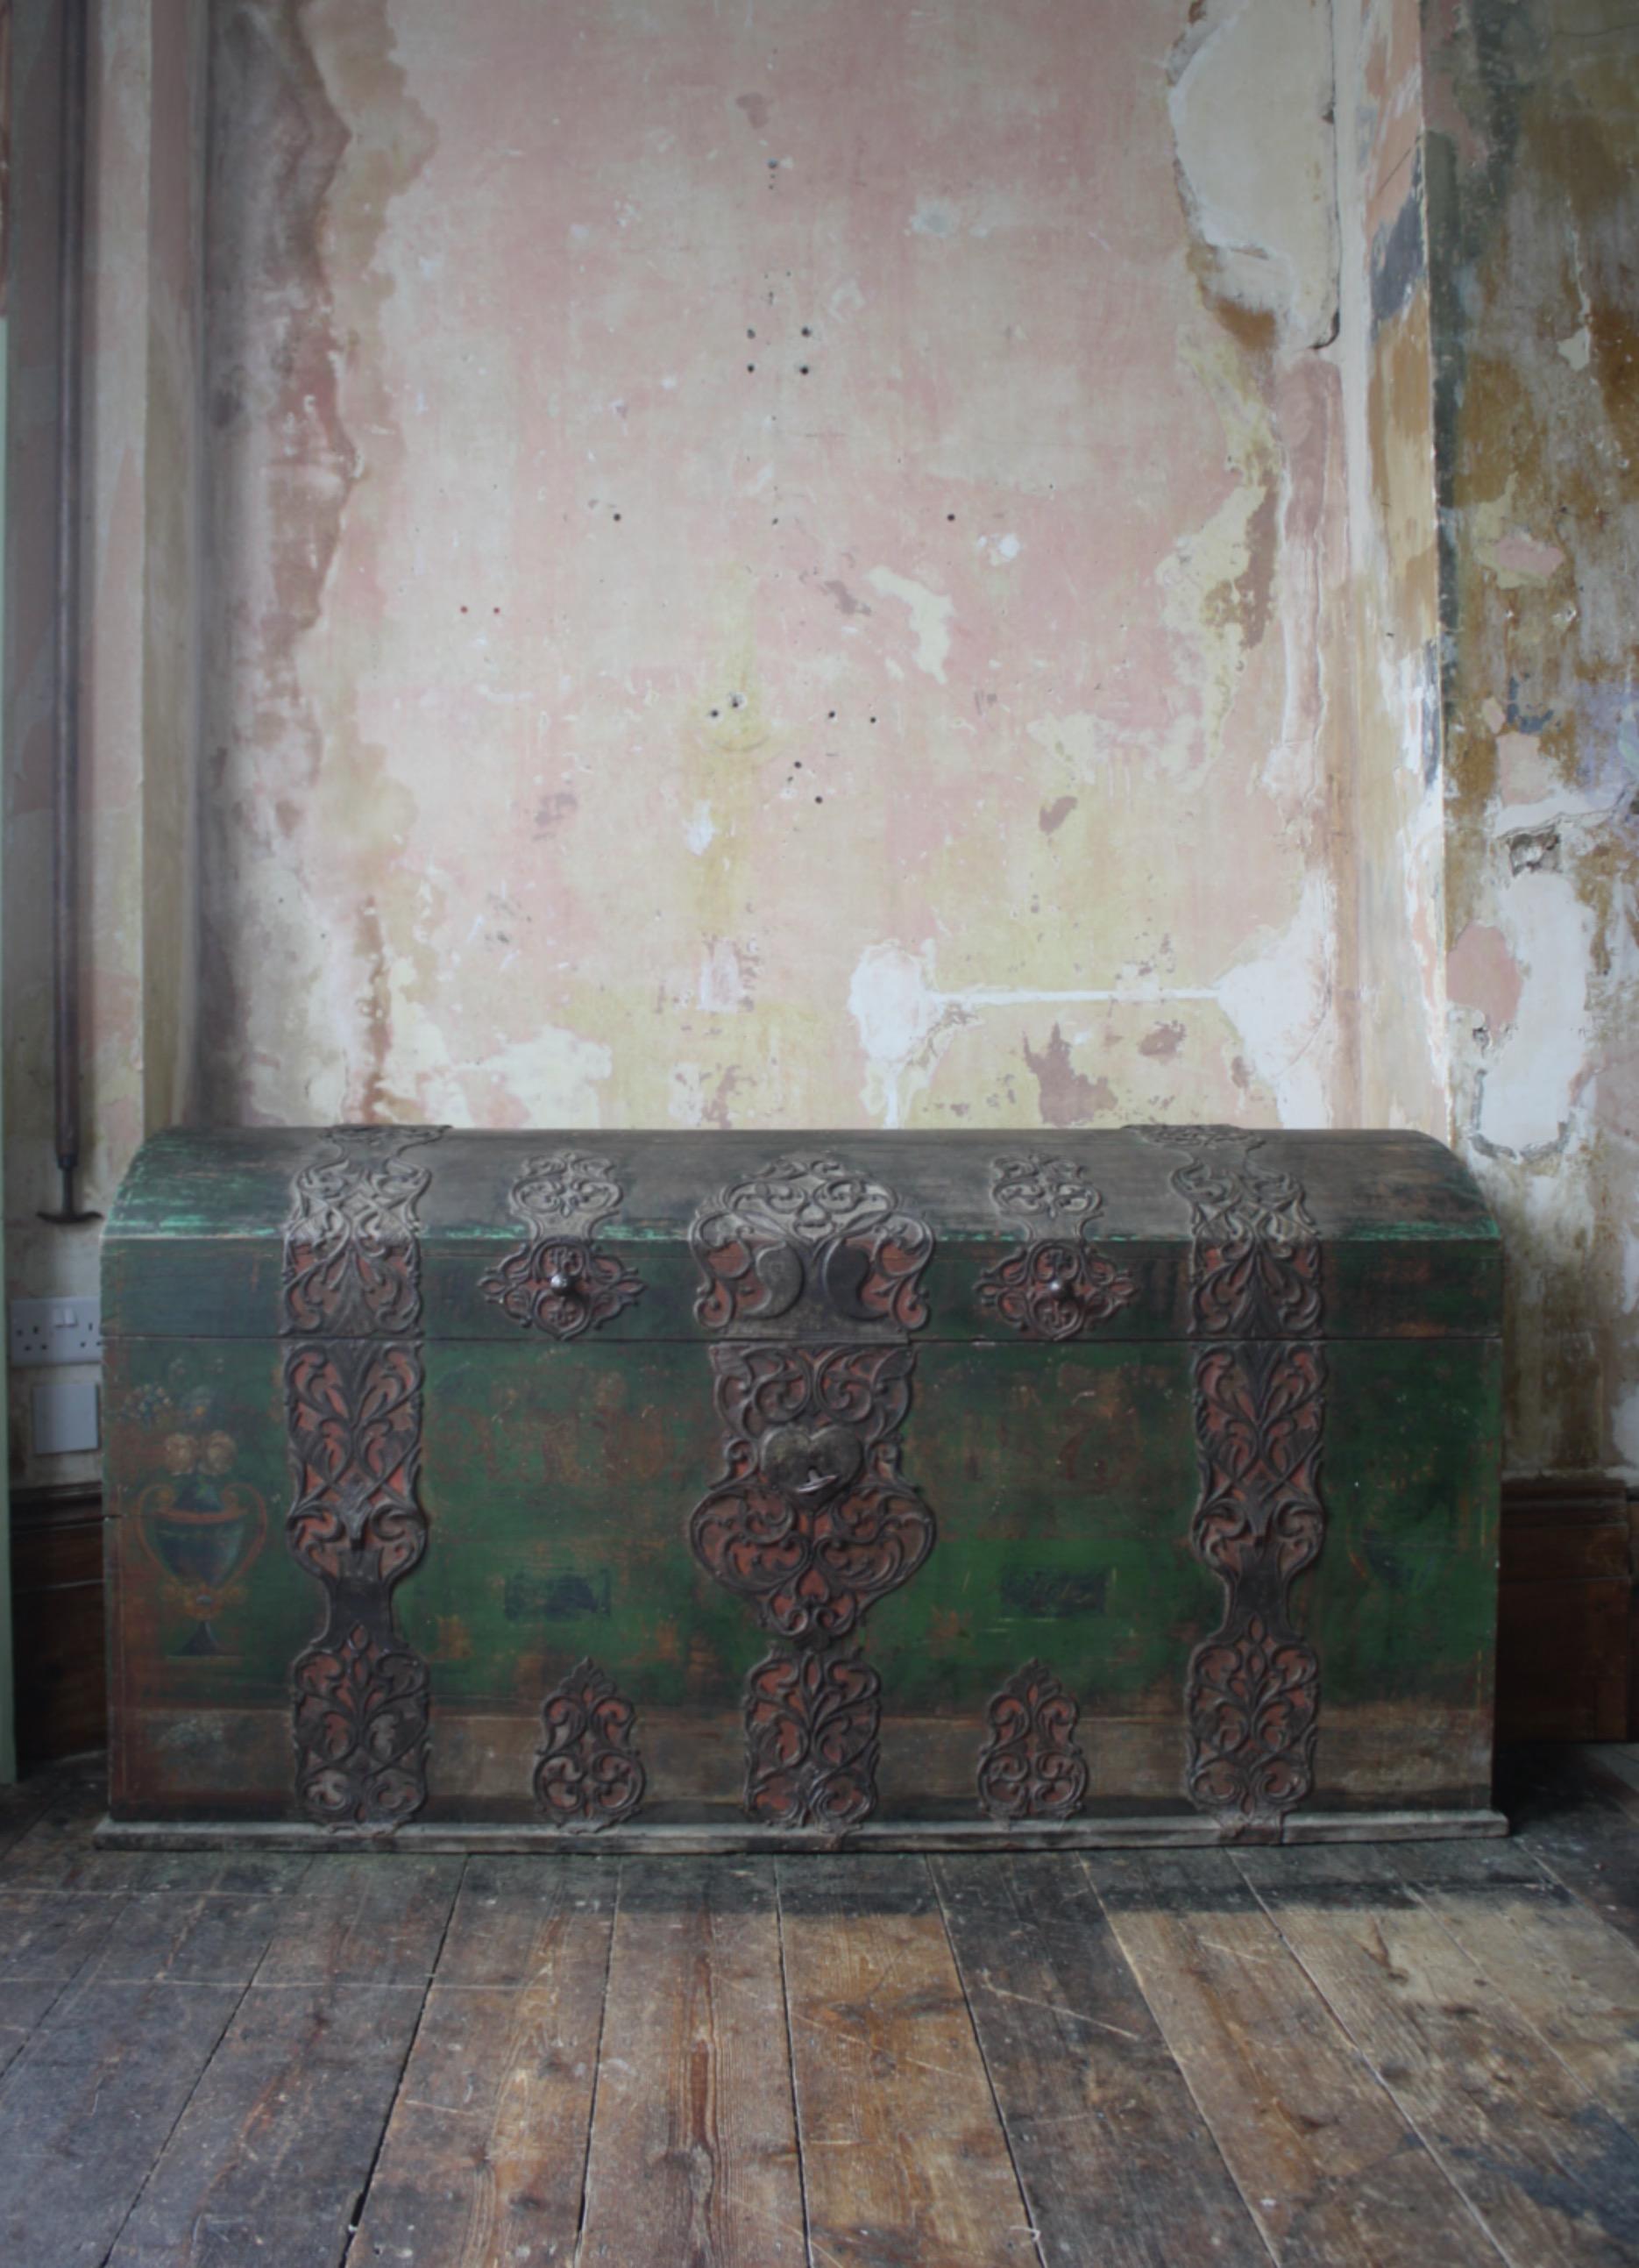 A huge 19th century Italian domed marriage chest, with its original pierced iron work, key and painted surface.

A wonderful spectrum of greens, obtains from years of sun bleaching, wear and human touch. 

The lock and key work perfectly, the